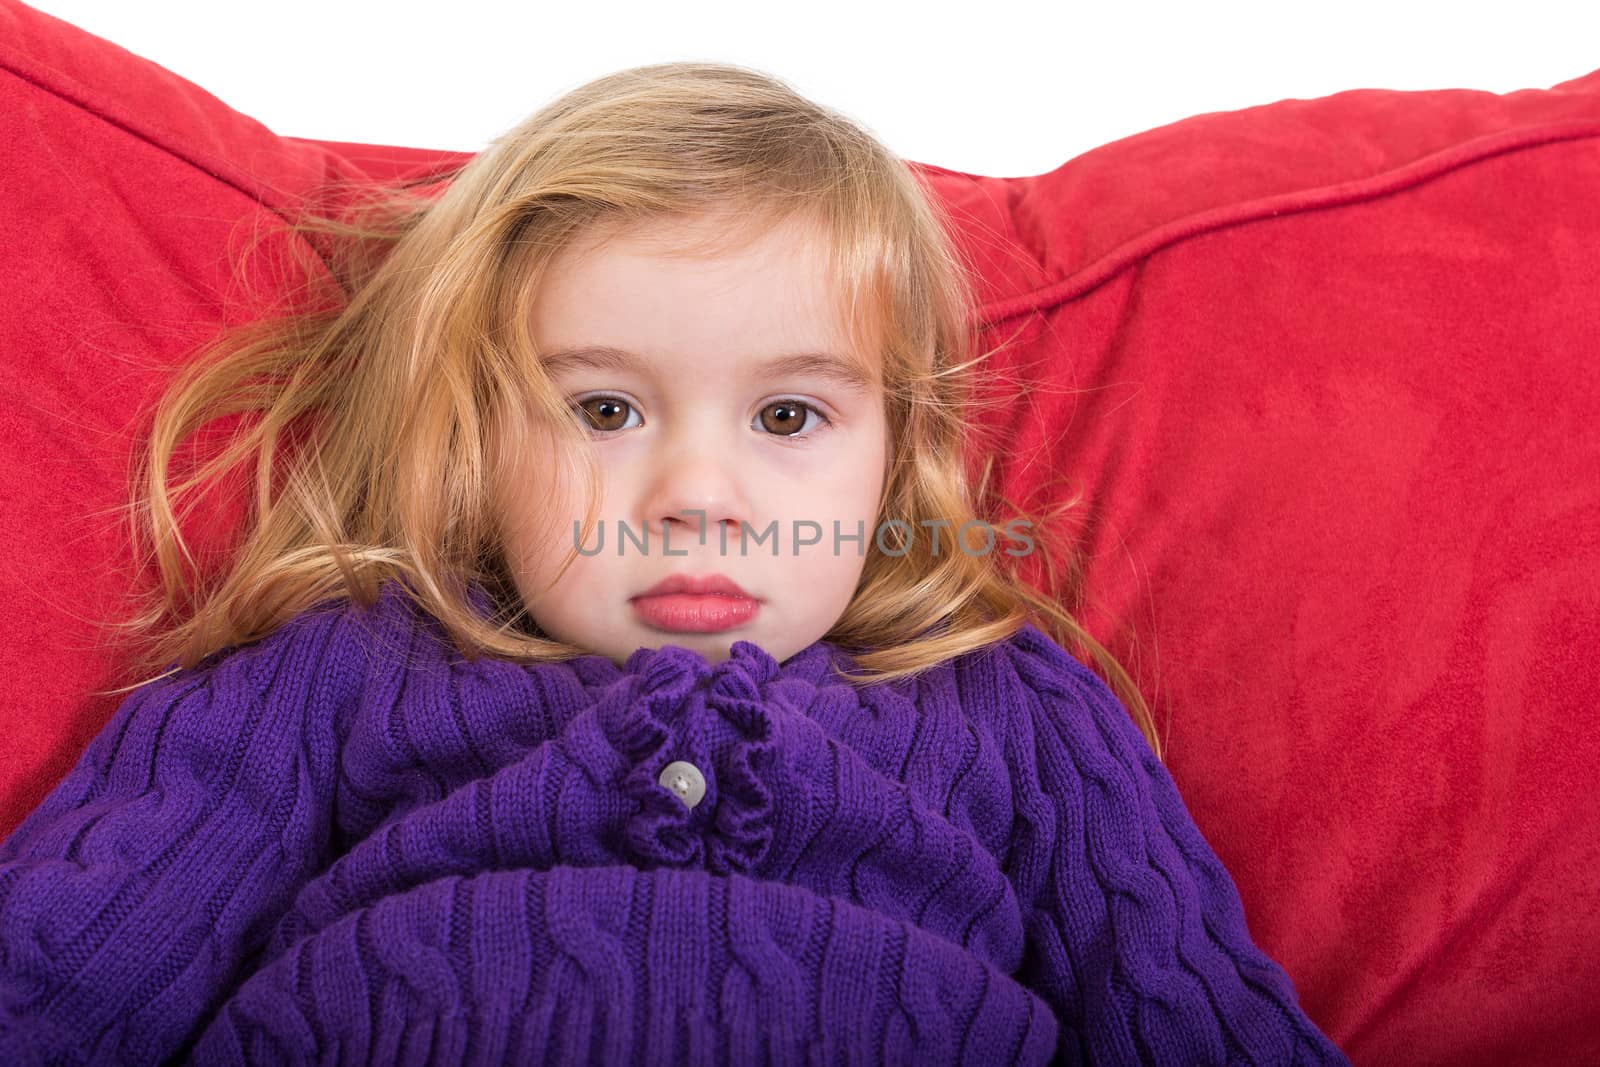 Cute solemn beautiful young girl staring at the camera with a calm expression as she relaxes on a comfortable red cushion in her colourful purple sweater